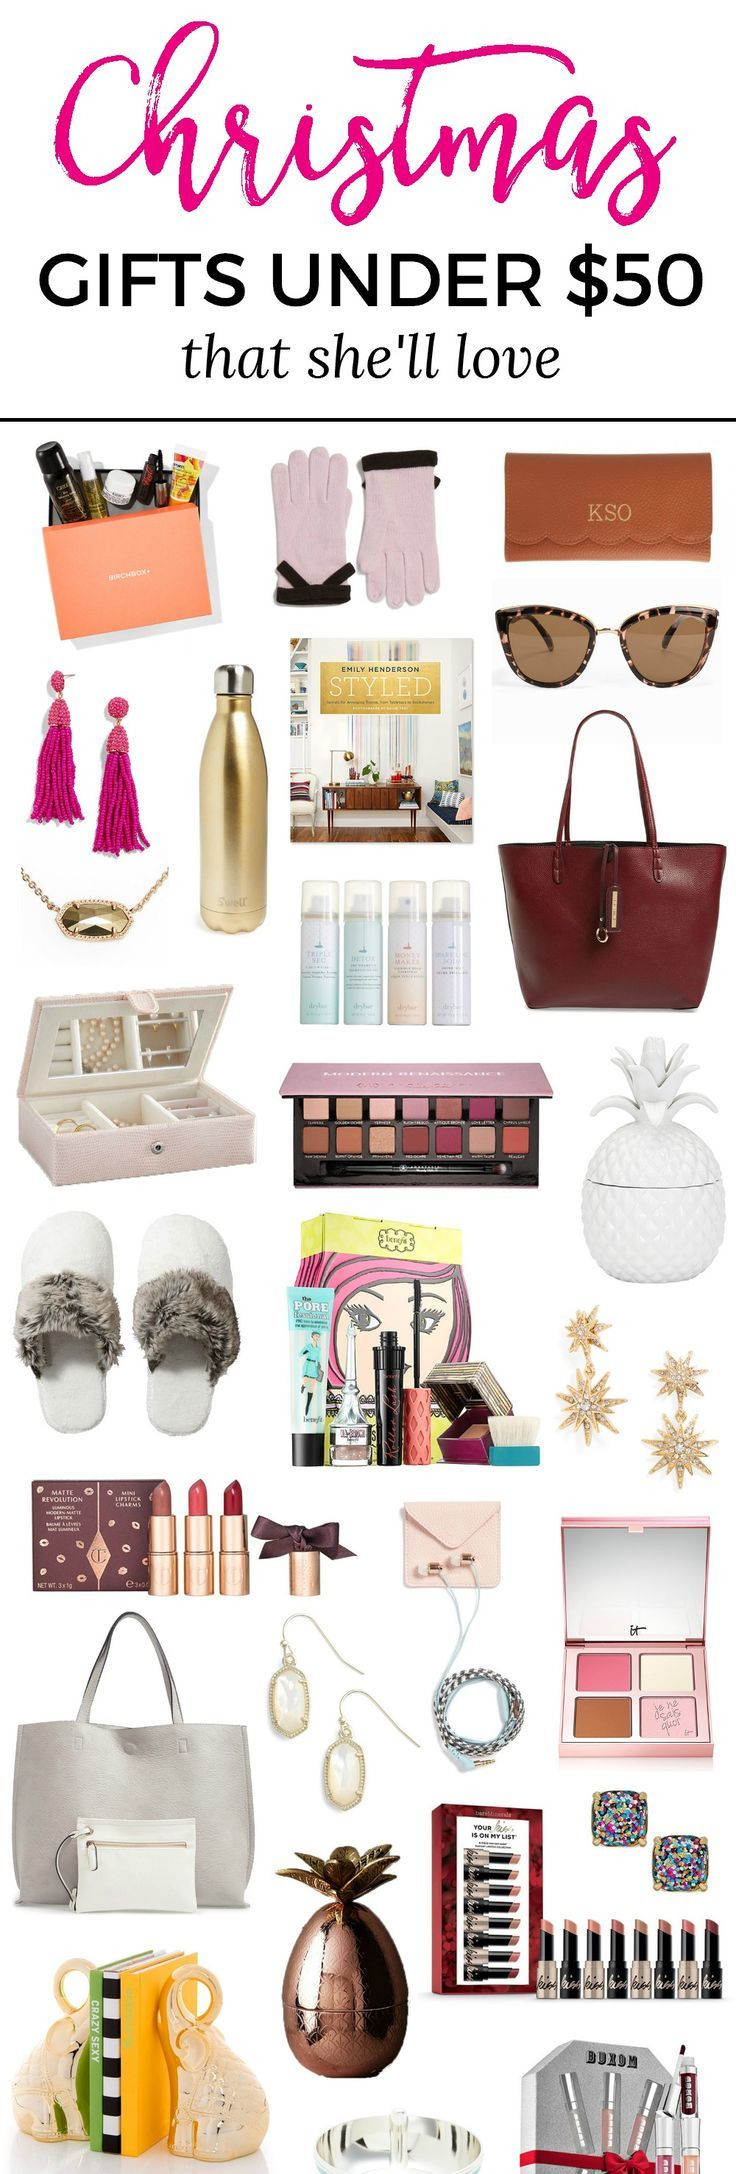 $50 Christmas Gift Ideas
 The Best Christmas Gift Ideas for Women under $50